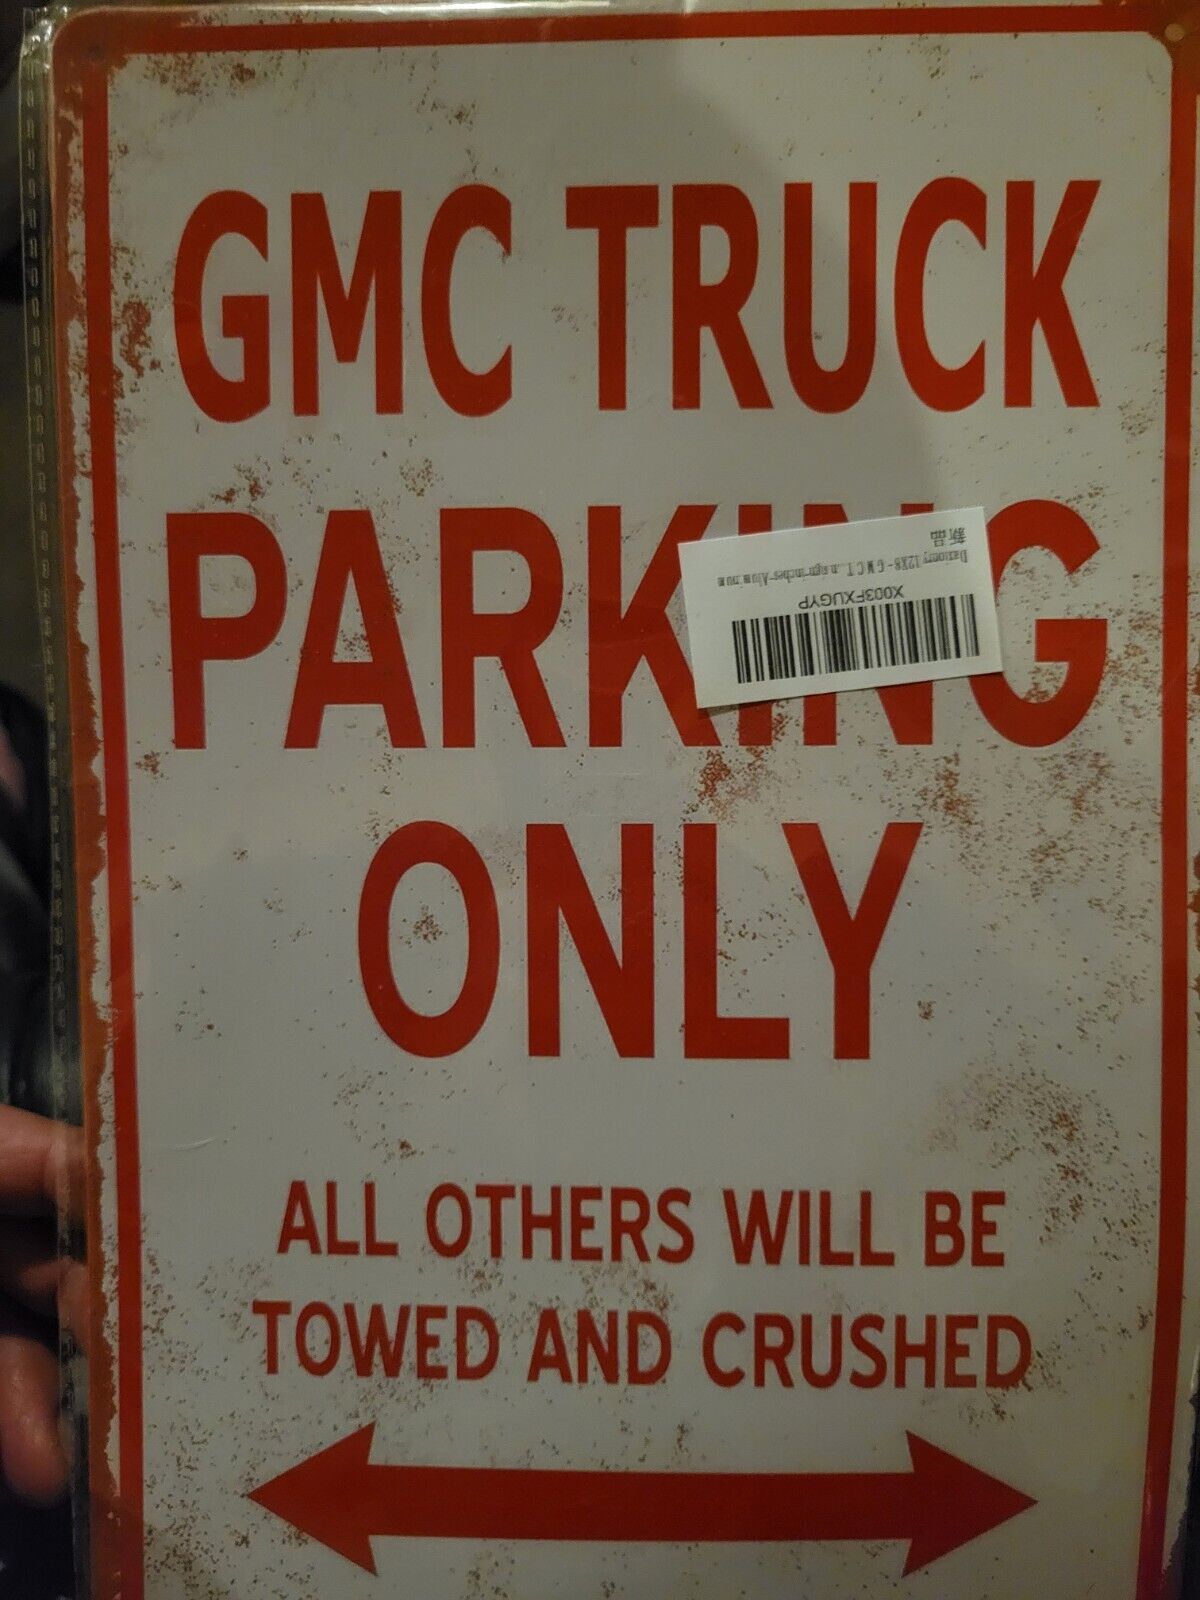 GMC TRUCK PARKING ONLY Vintage Look Reproduction metal sign